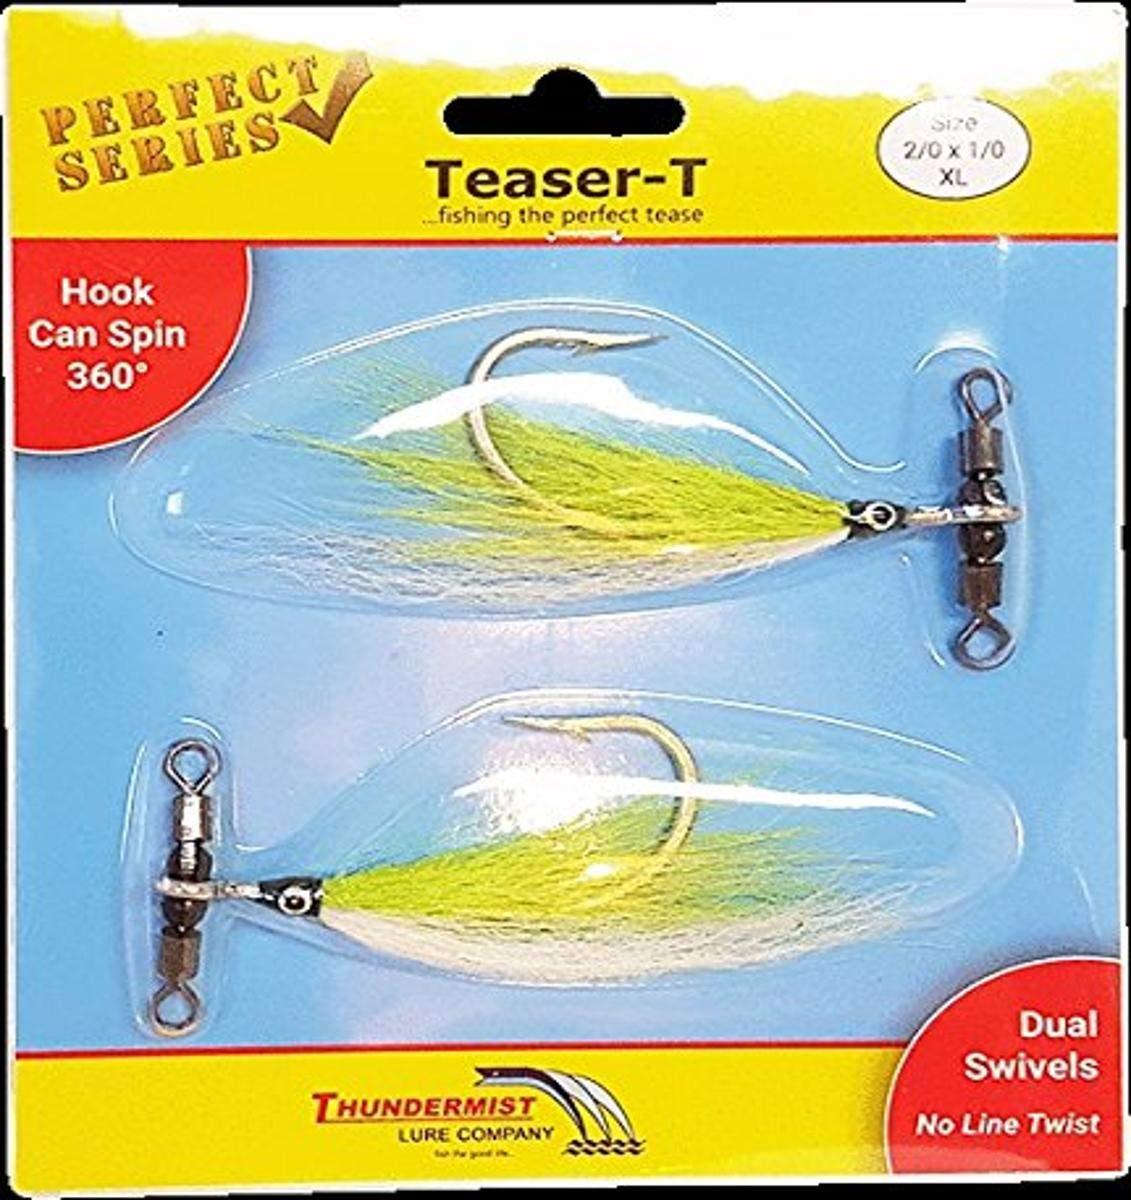 Thundermist Lure Company TSR-2/0X1/0-CW Teaser-T Fishing Terminal Tackle,  Chartreuse